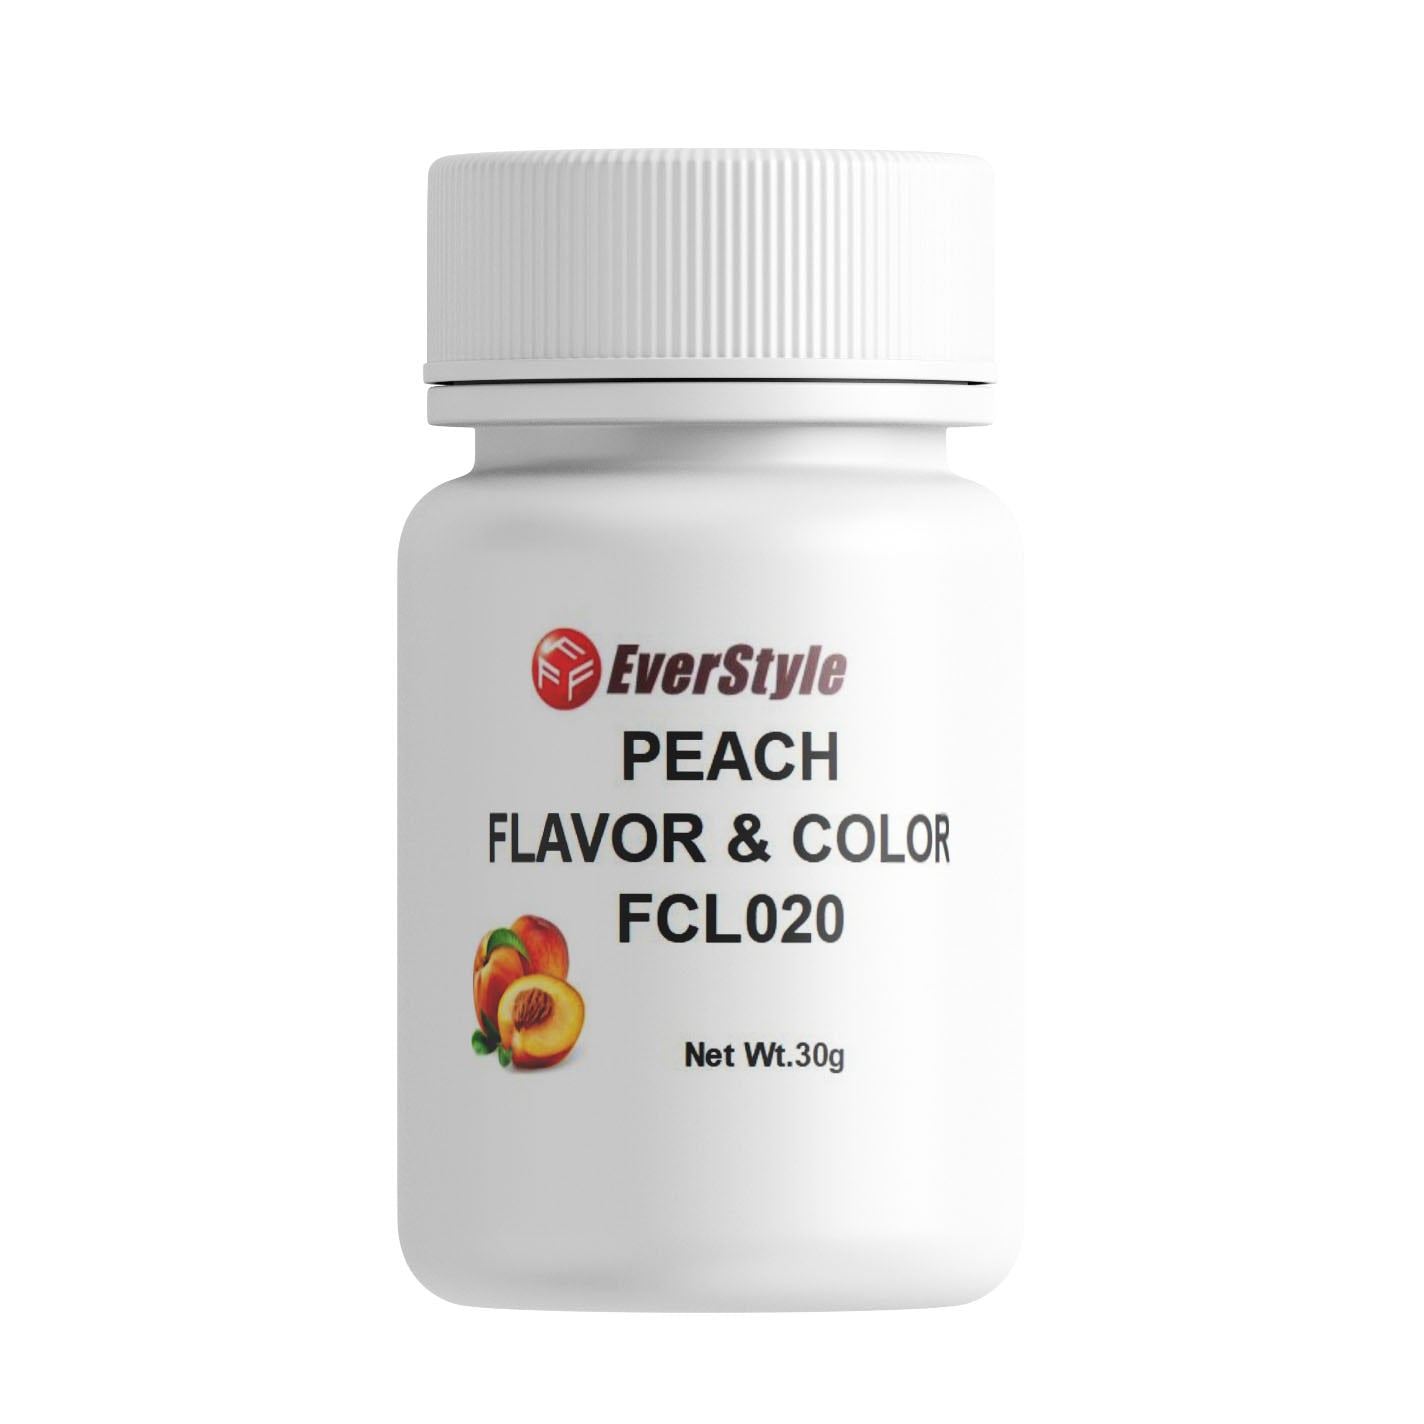 Everstyle Peach Flavor and Color 30g (FCL020)